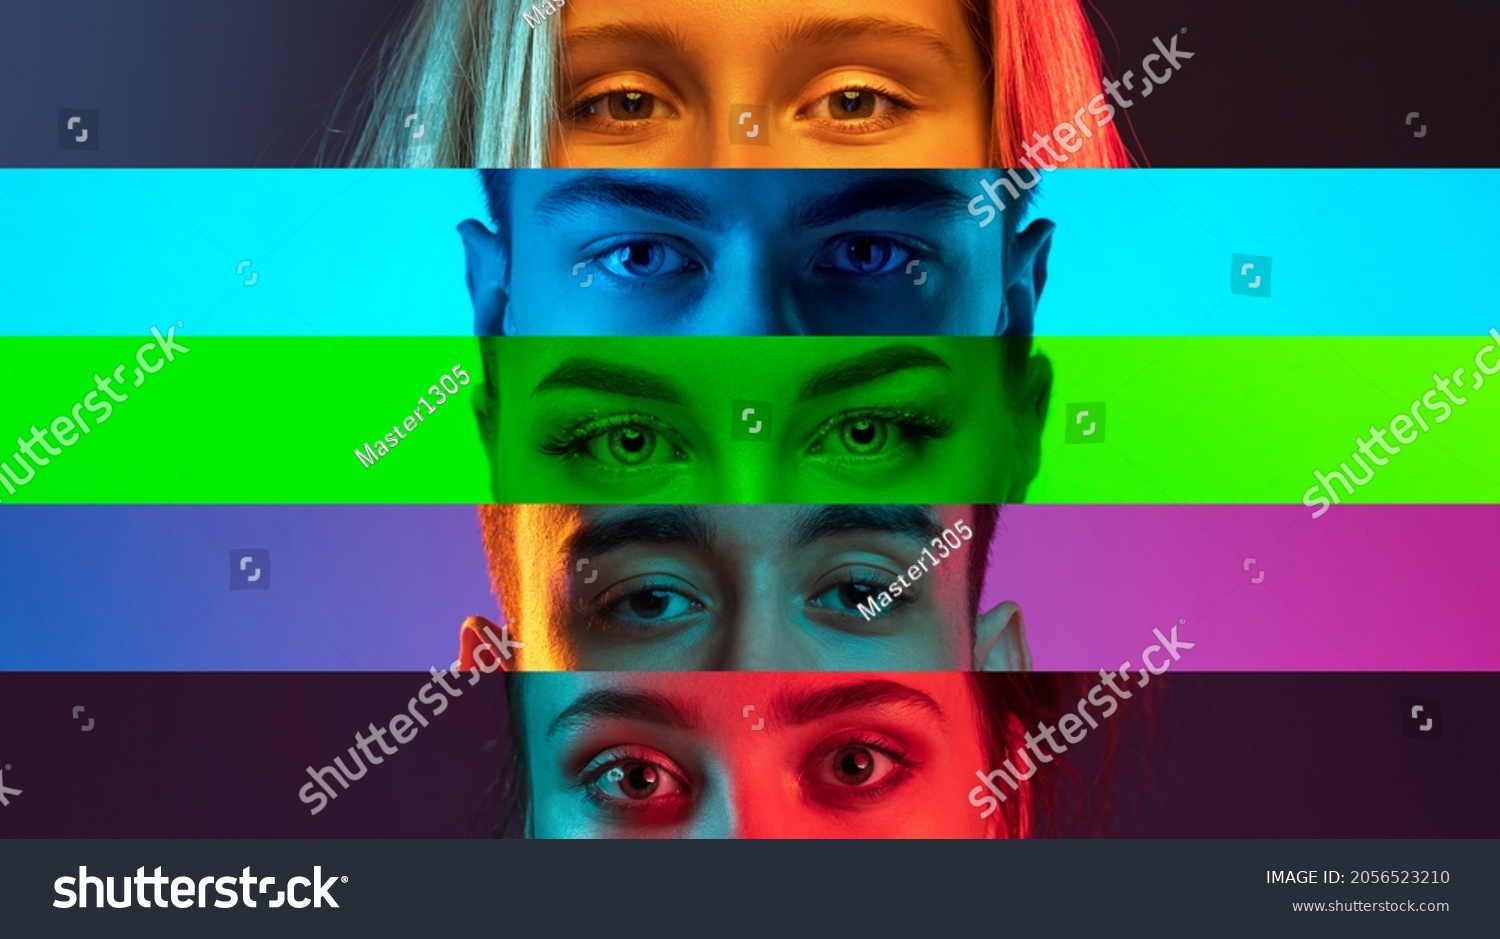 Collage of close-up male and female eyes isolated on colored neon backgorund. Multicolored stripes. Concept of equality, unification of all nations, ages and interests. Diversity and human rights #2056523210